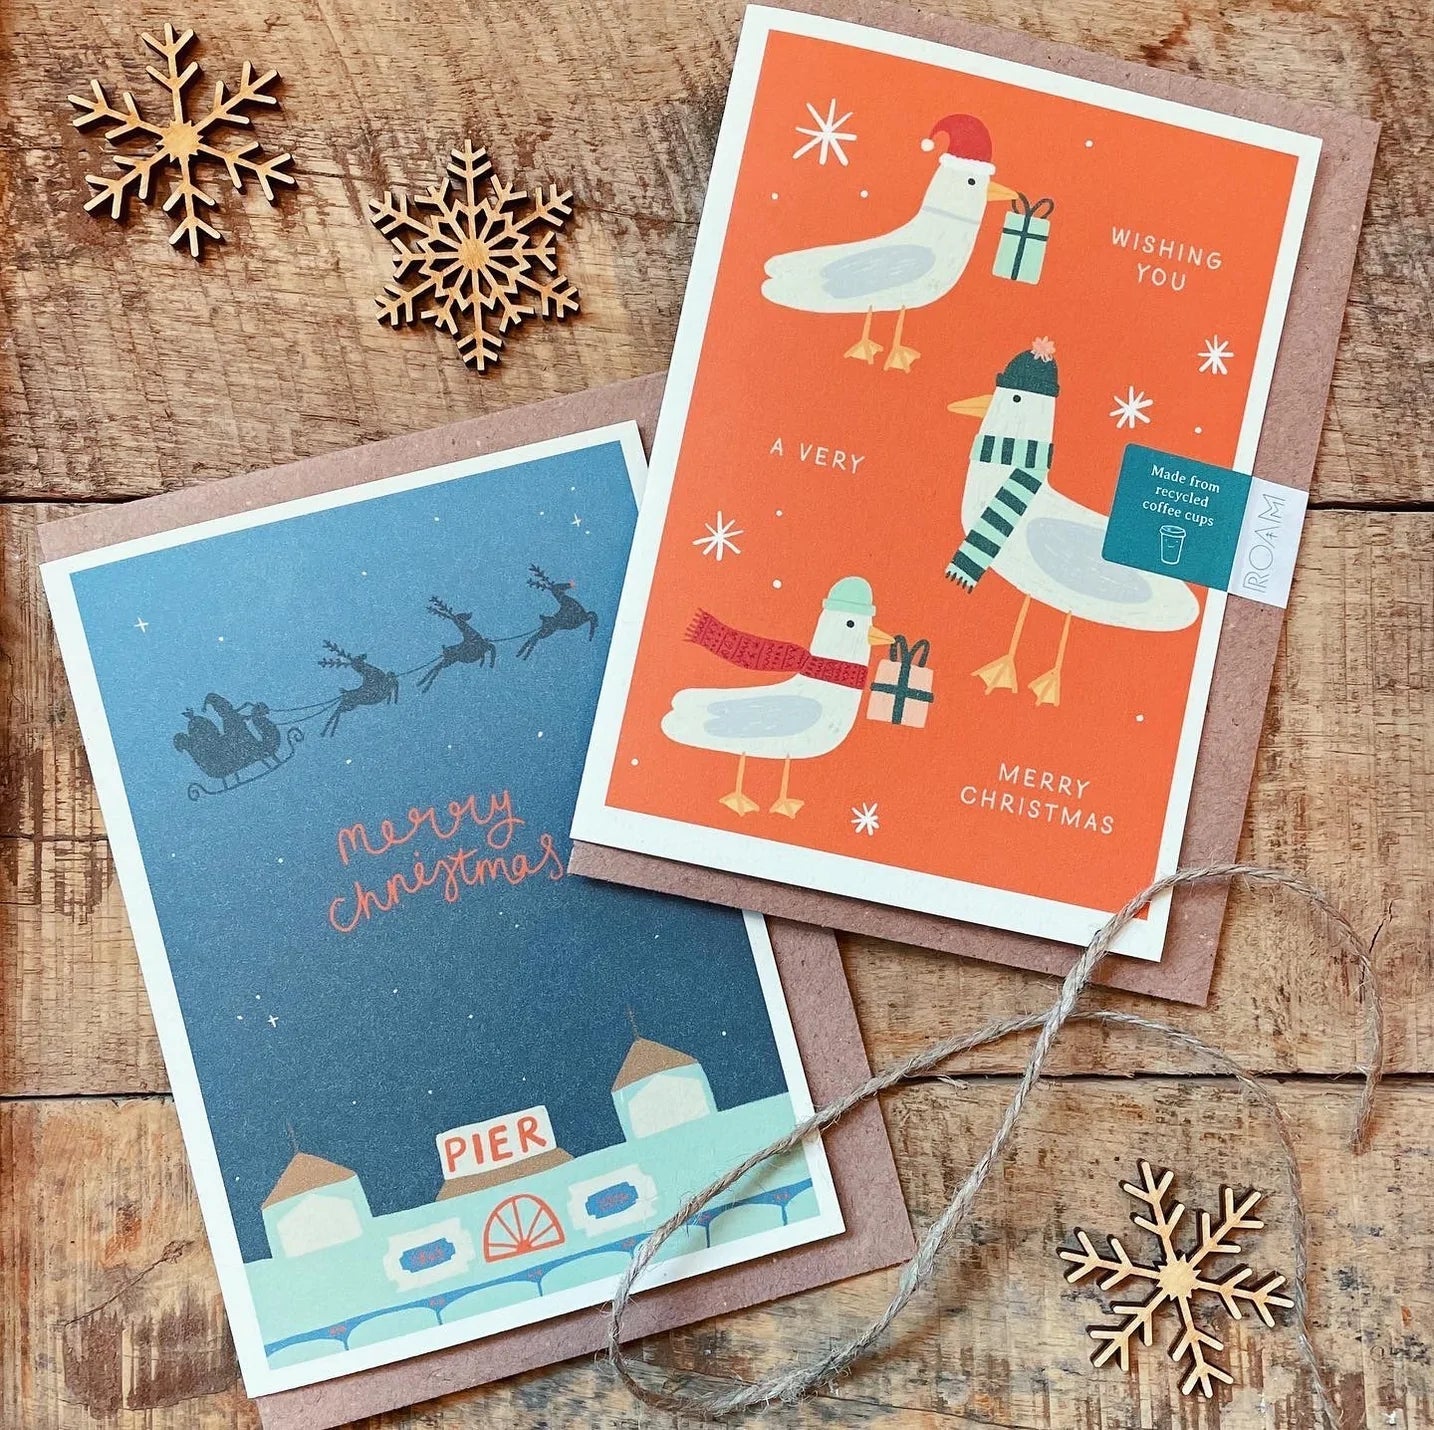 Pack of 4 Recycled Coffee Cup Christmas Card - Pier & Seagulls